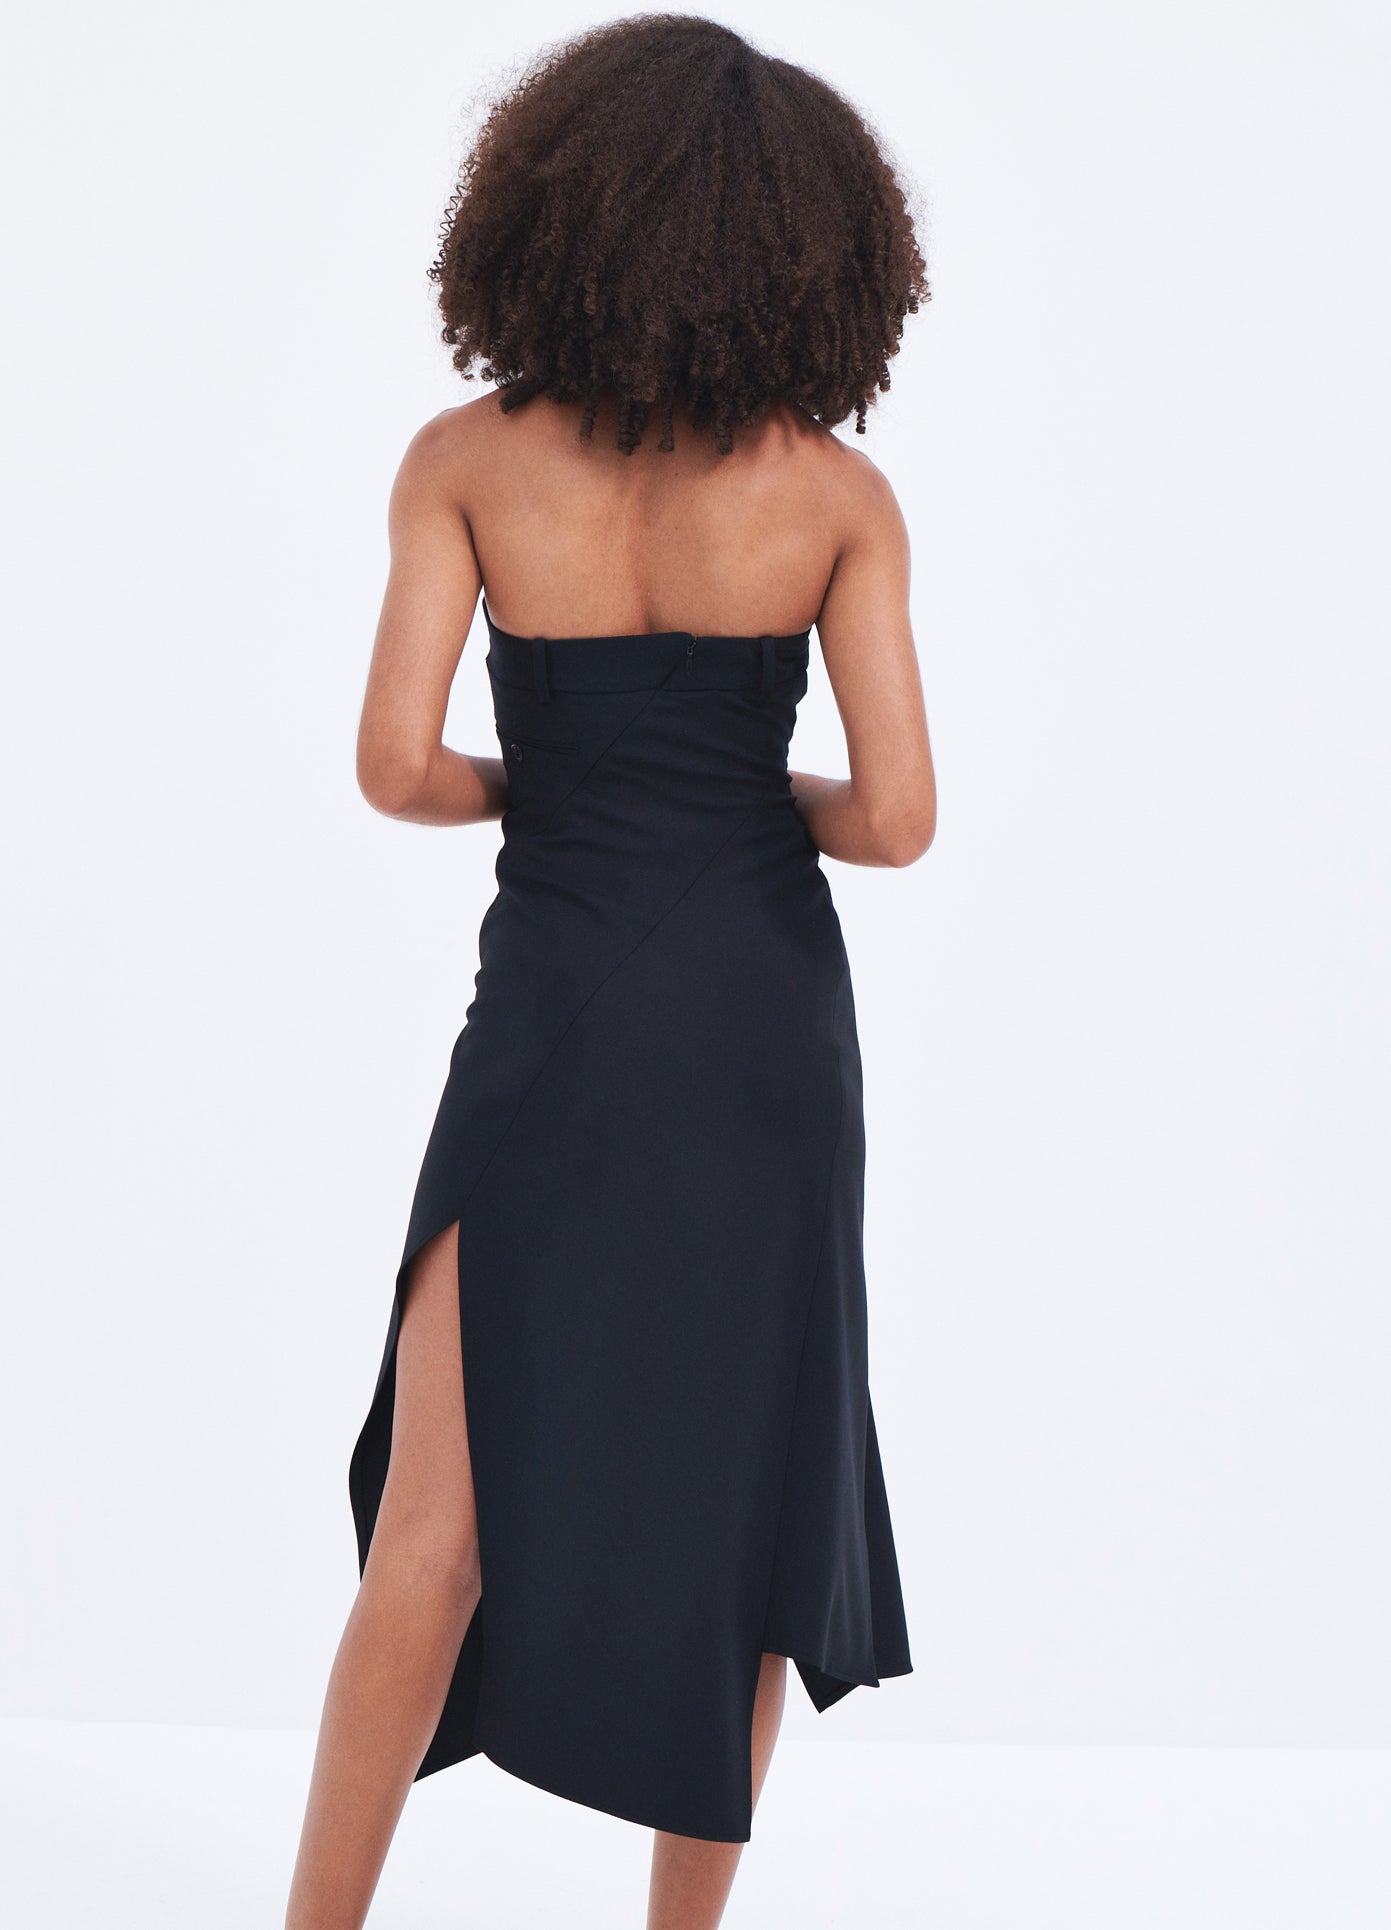 MONSE Twisted Strapless Dress in Black on model back view